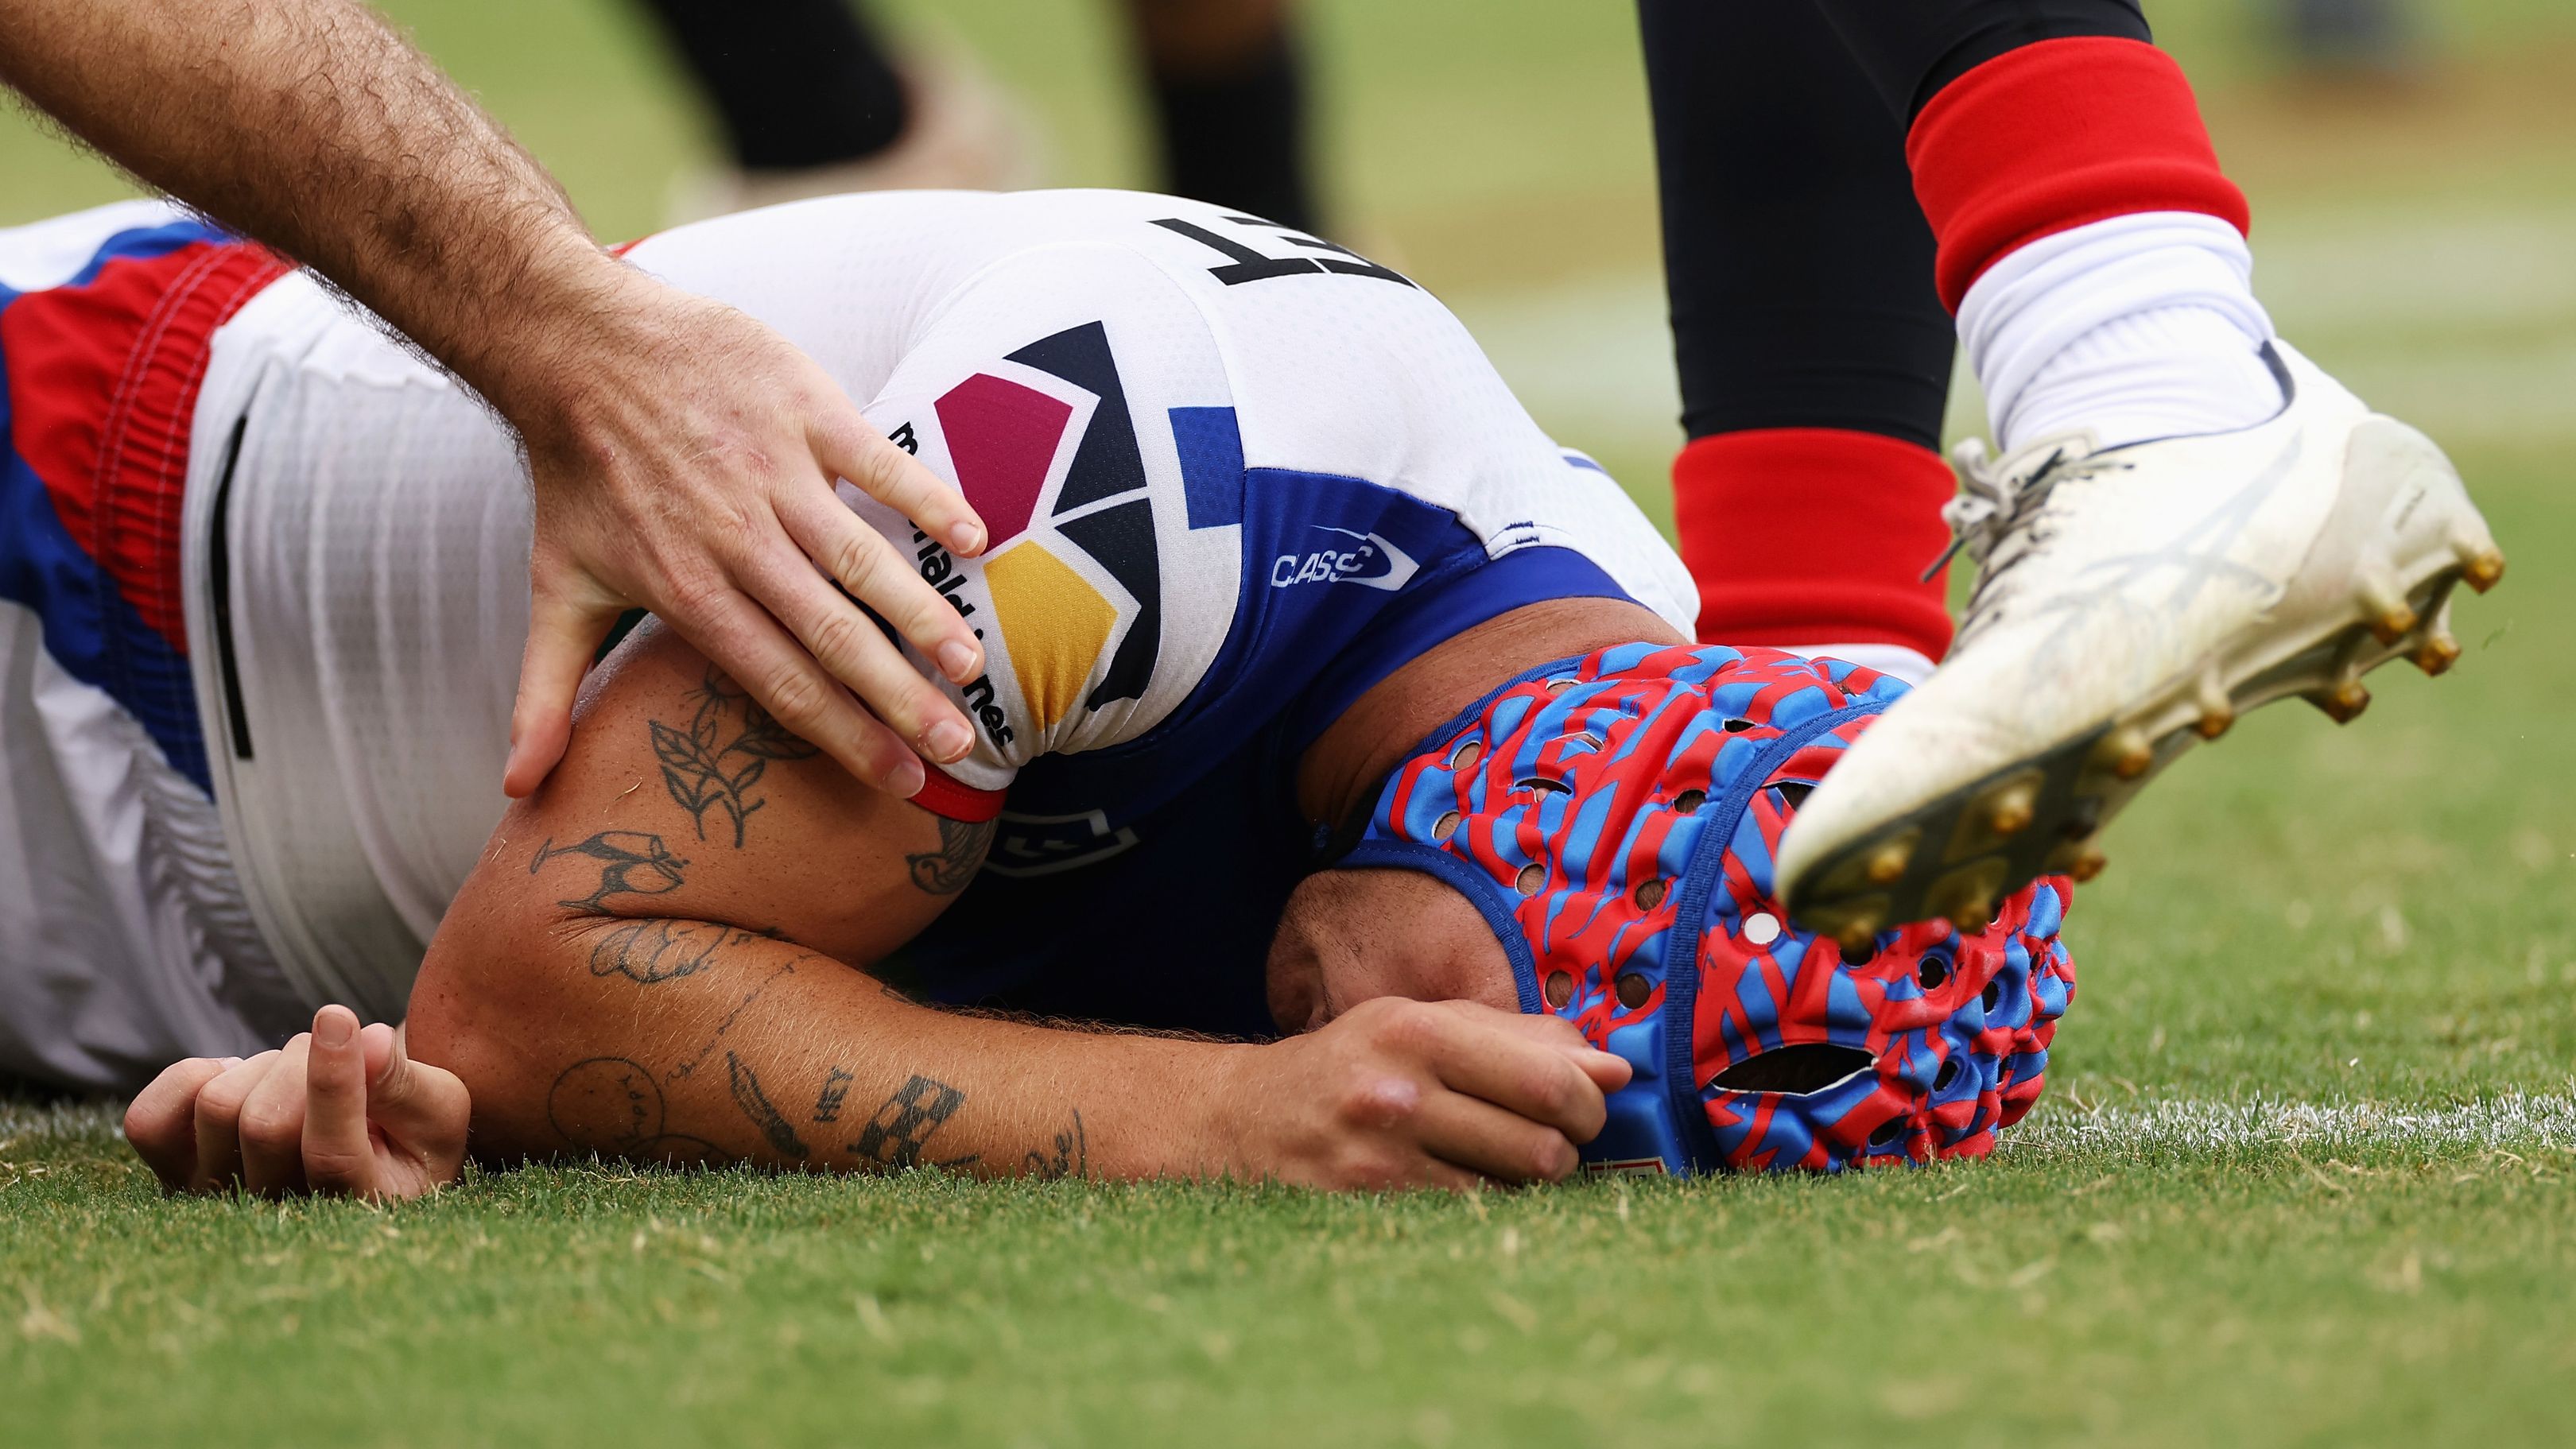 SYDNEY, AUSTRALIA - MARCH 12: Kalyn Ponga of the Knights lays on the ground after colliding with Asu Kepaoa of the Tigers during the round two NRL match between Wests Tigers and Newcastle Knights at Leichhardt Oval on March 12, 2023 in Sydney, Australia. (Photo by Cameron Spencer/Getty Images)